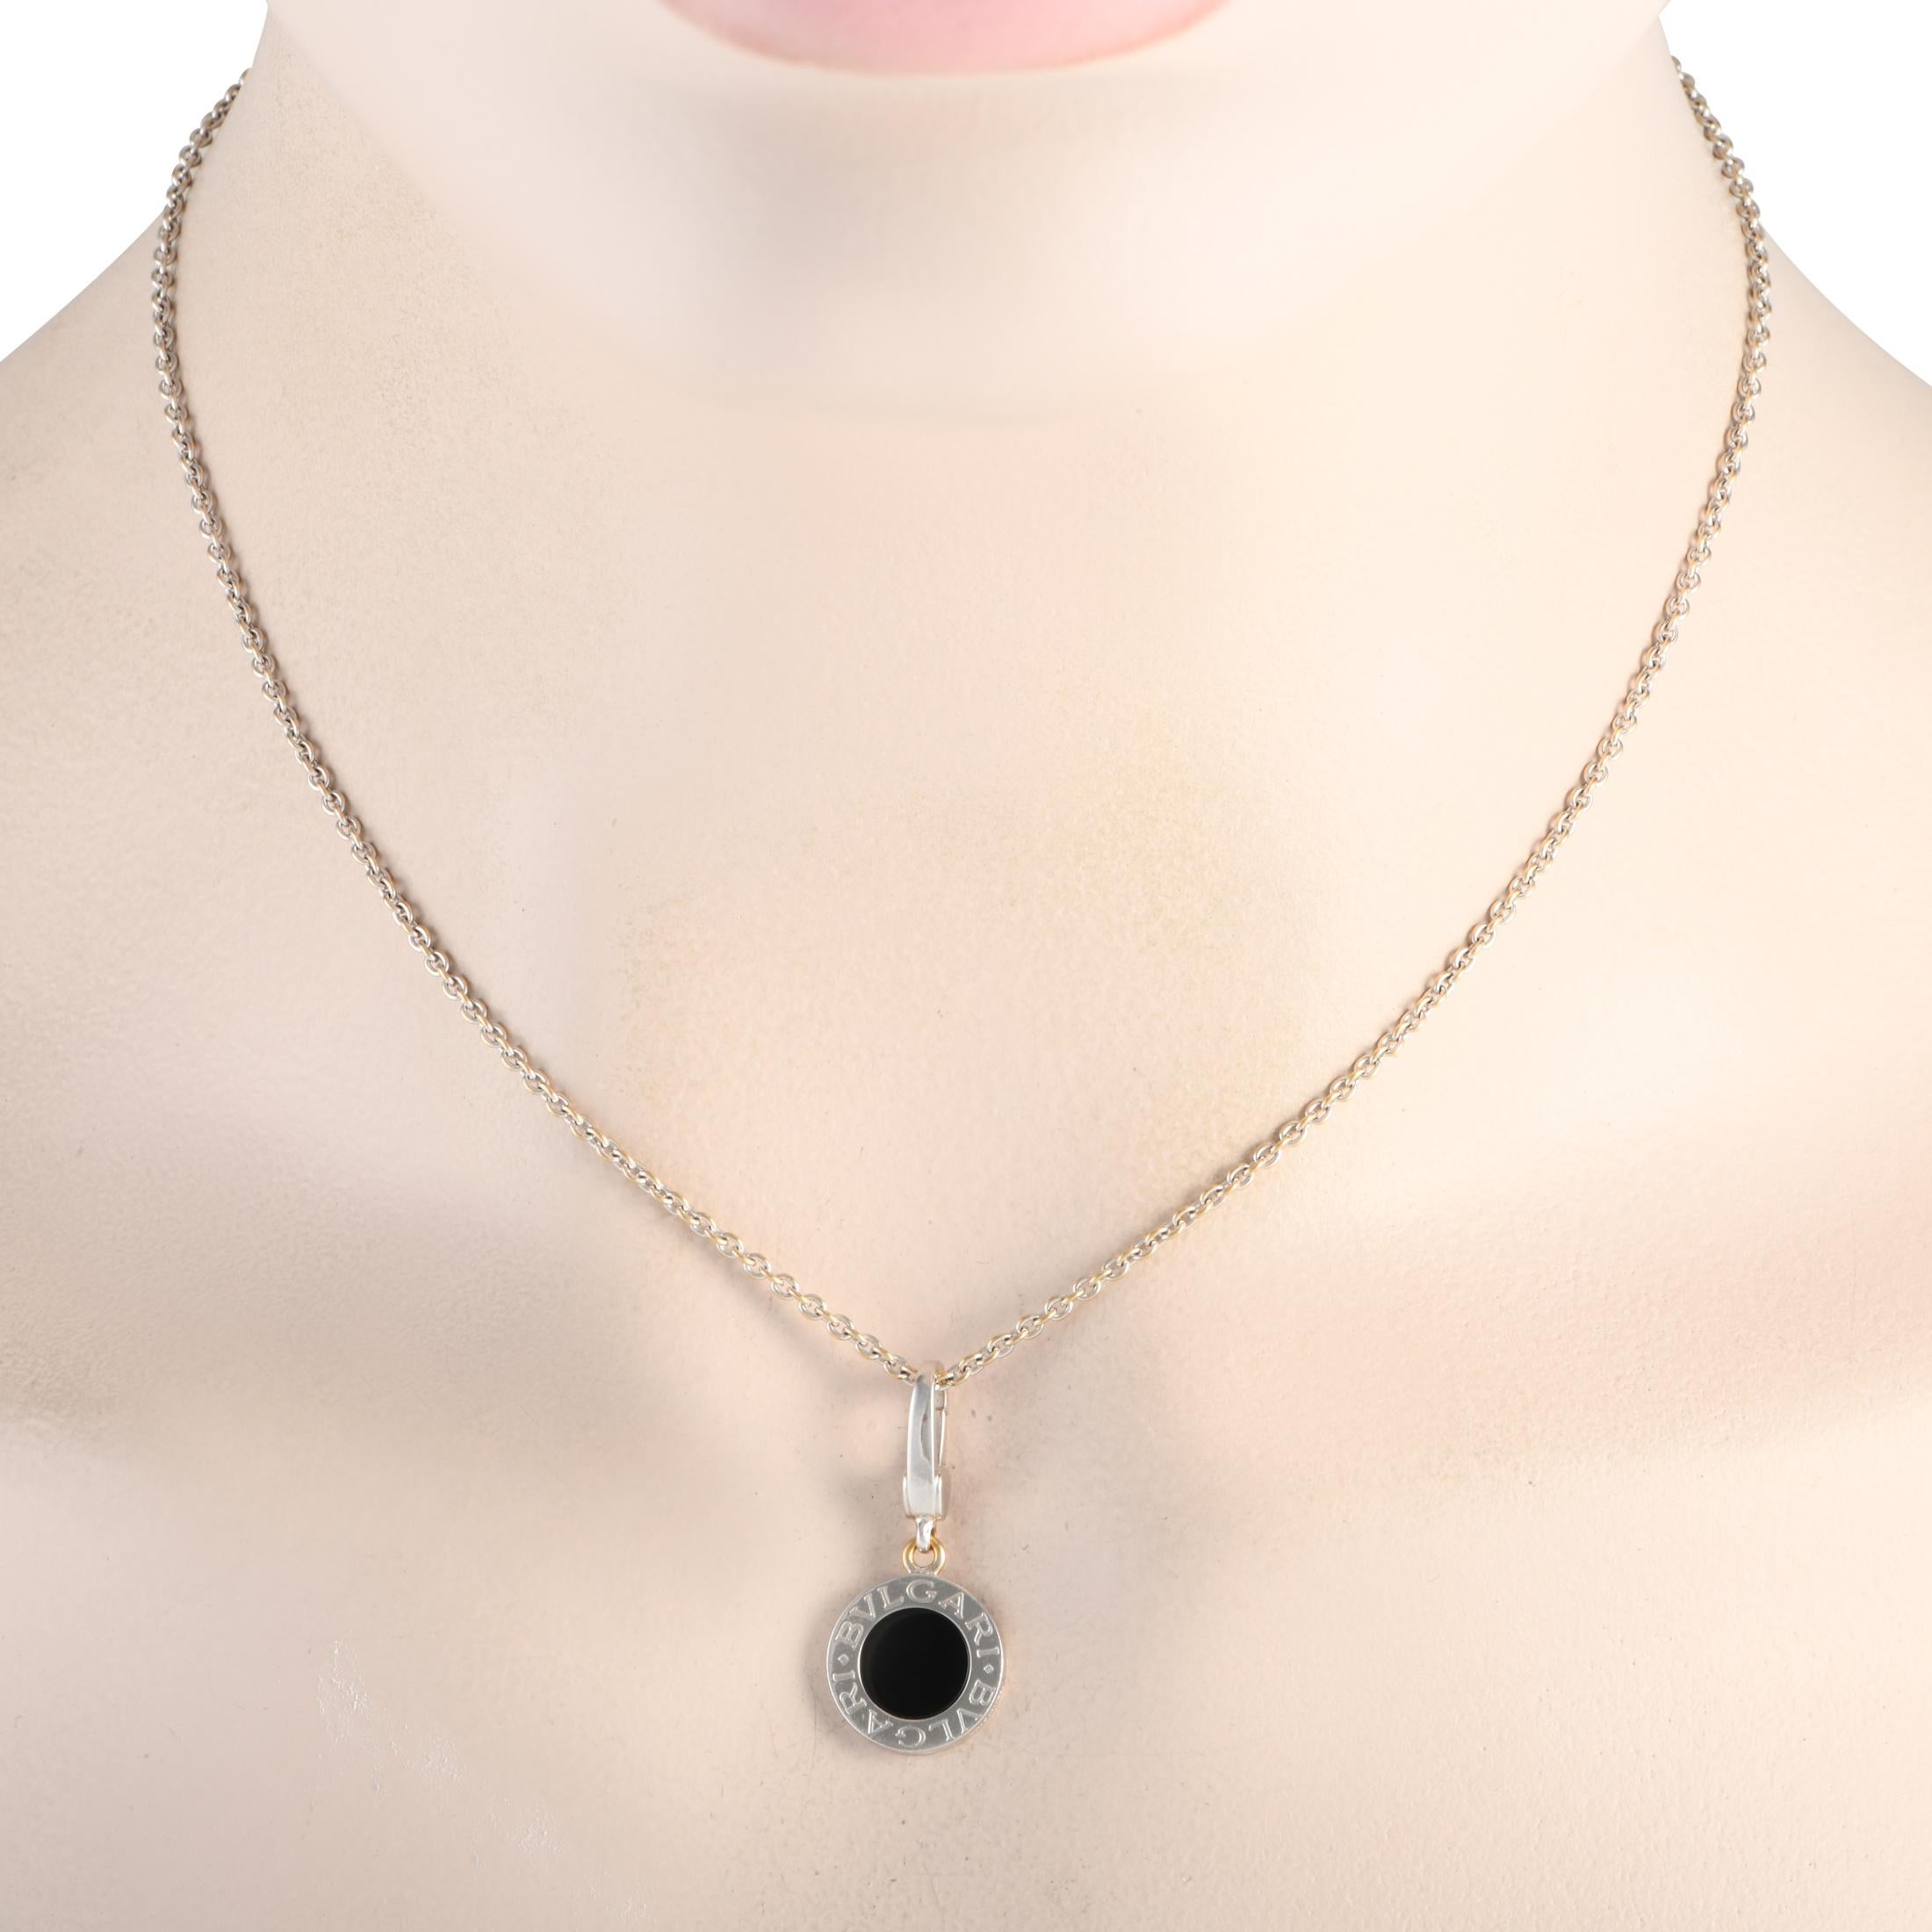 This simple, elegant Bvlgari necklace will serve as a luxurious addition to any ensemble. Suspended from a sleek 16” chain, you’ll find an 18K White Gold pendant measuring 1.0” long and 0.5” wide - It’s elevated by a singular onyx stone and the